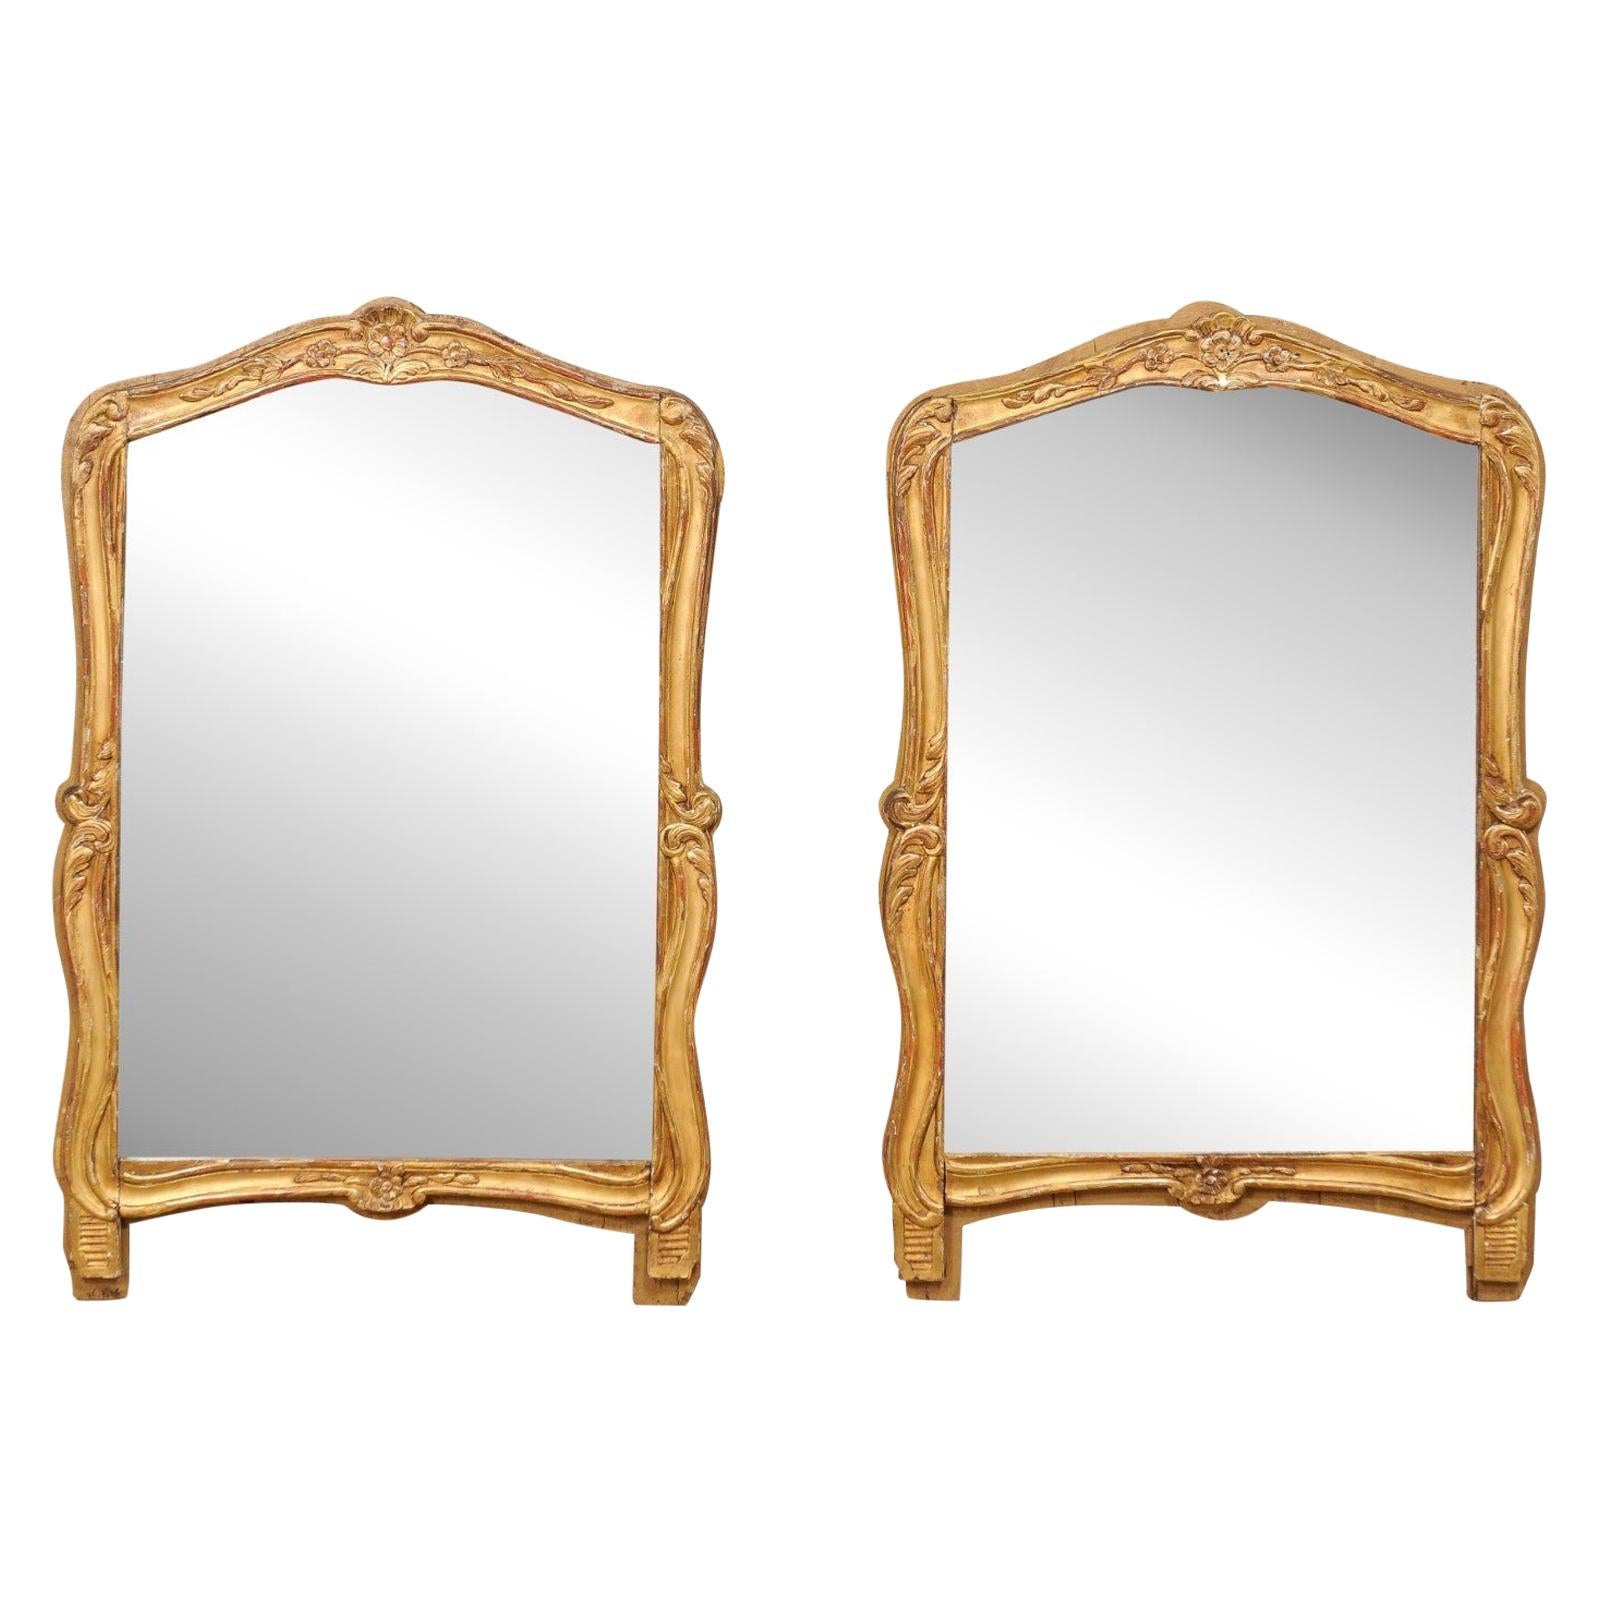 French Pair of 19th C. Mirrors w/ Their Original Gilt Finish For Sale